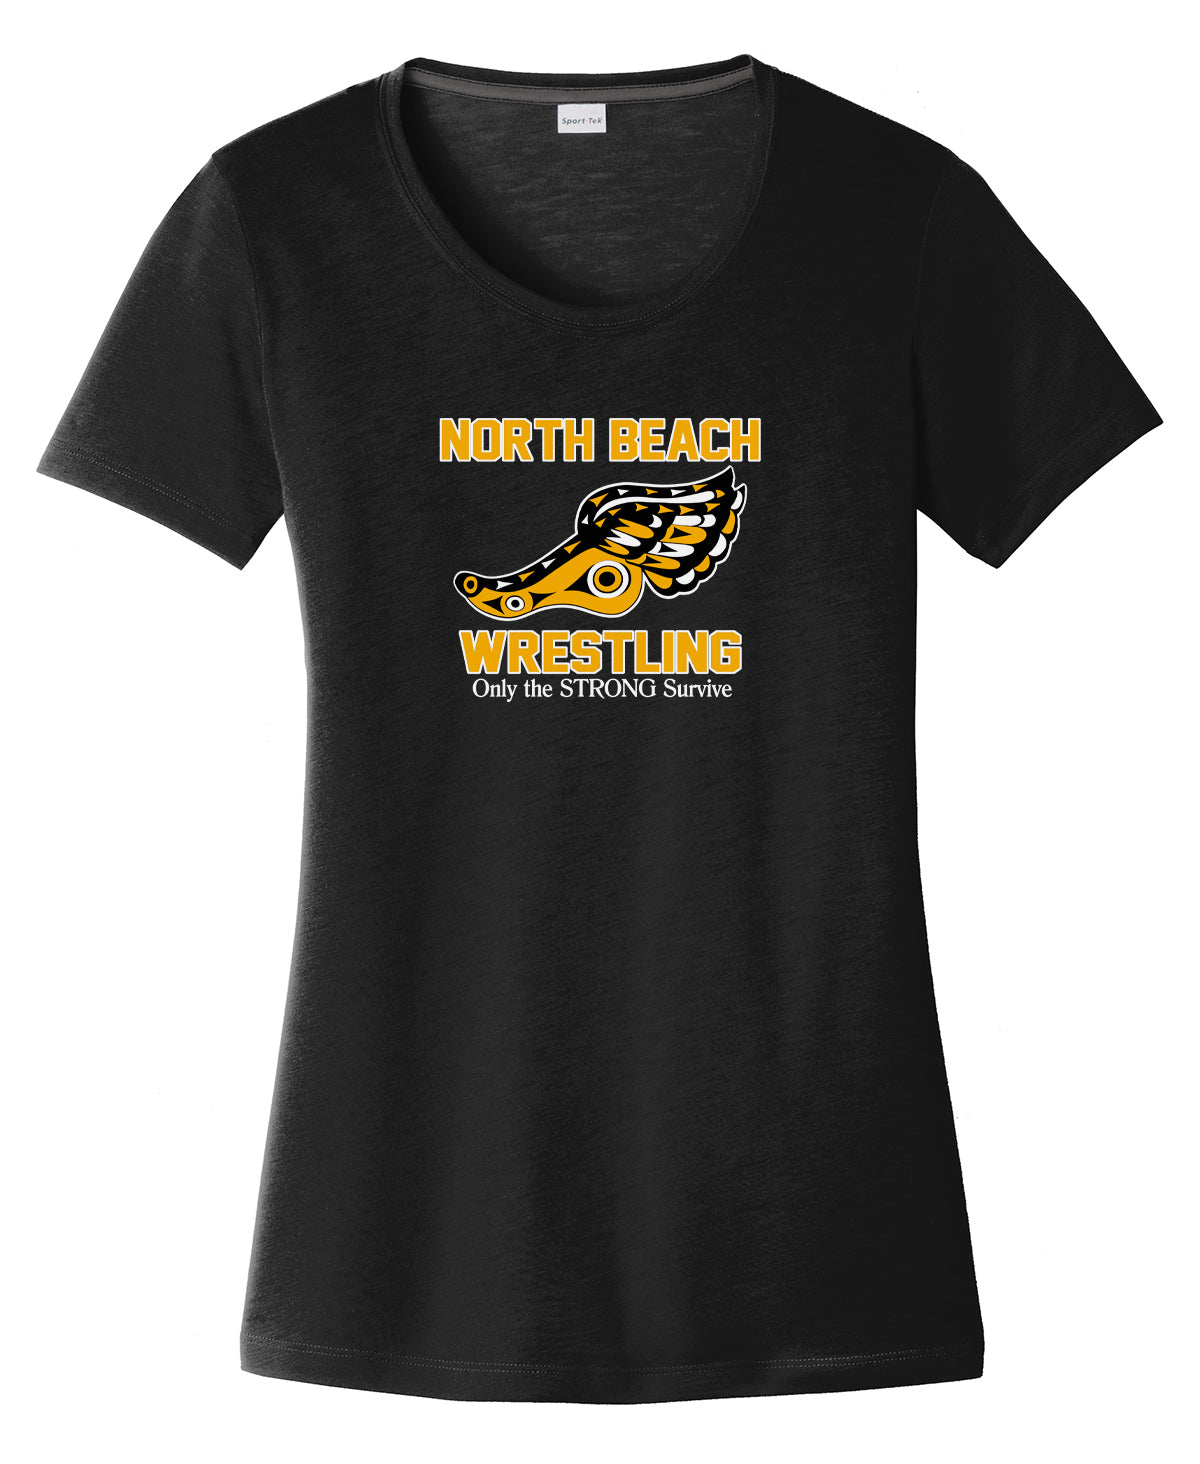 North Beach Wrestling Women's CottonTouch Performance T-Shirt: Quote Logo